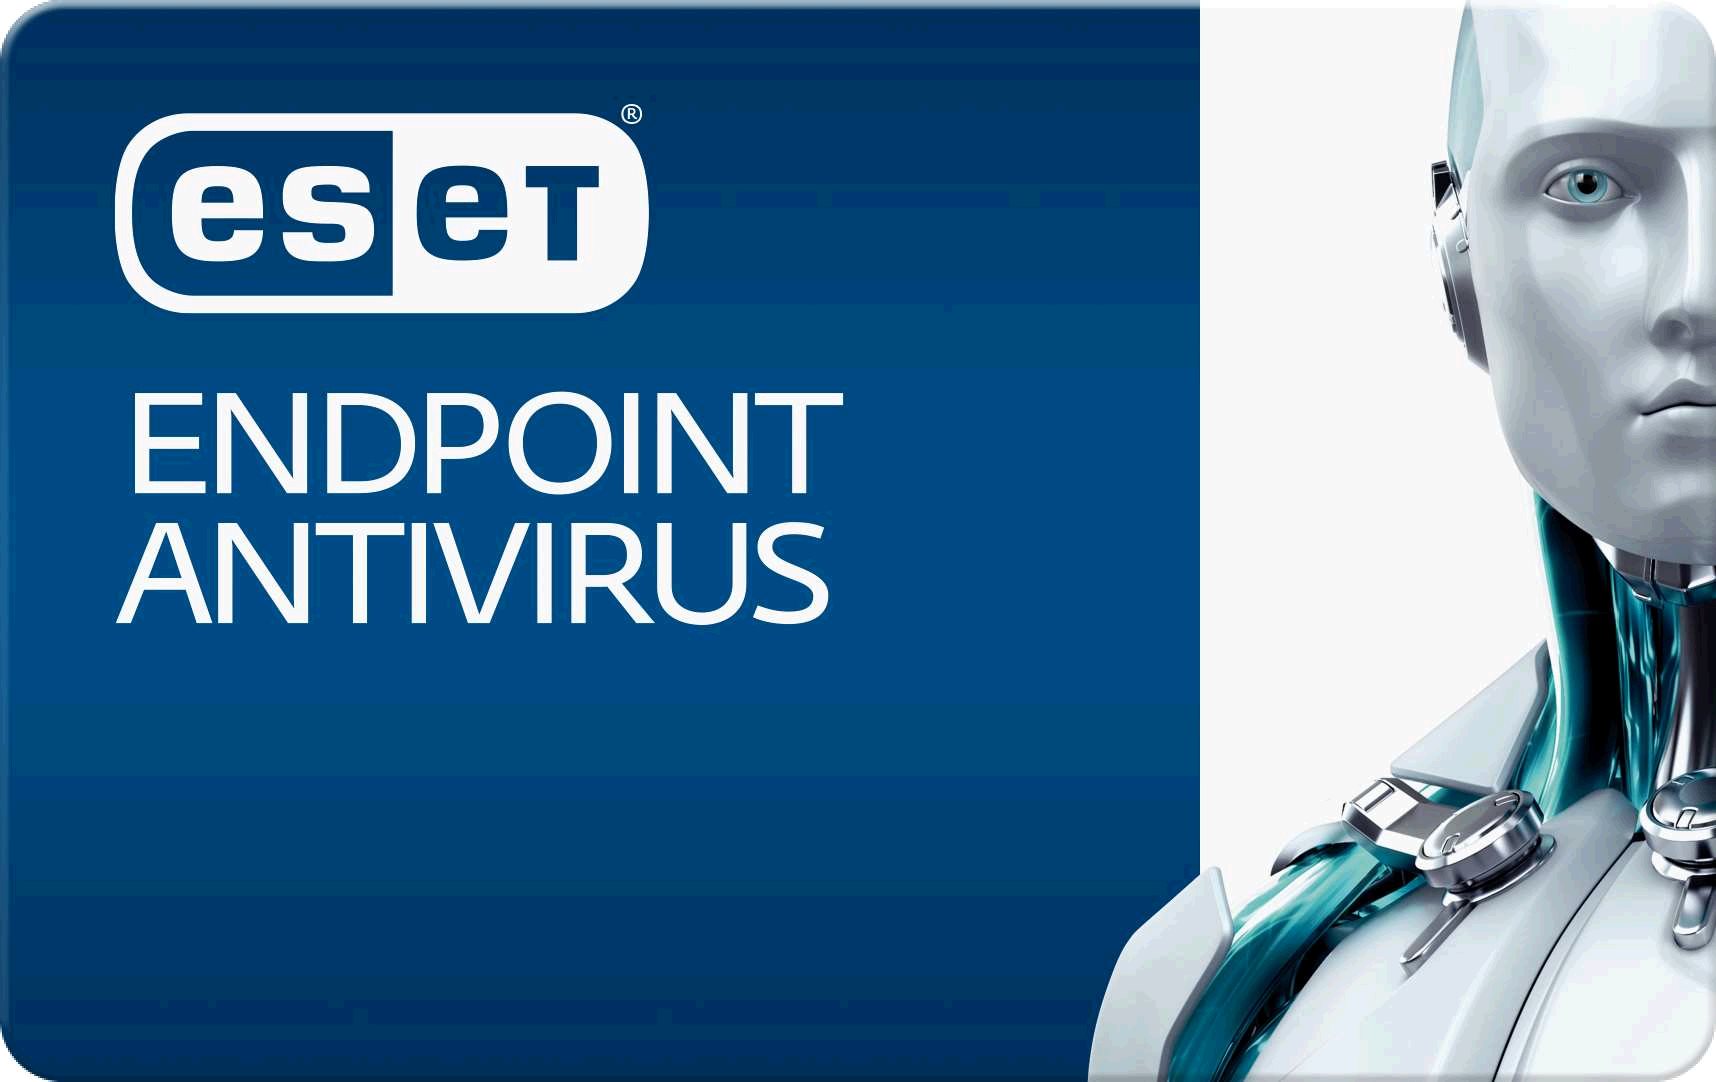 ESET Endpoint Antivirus 10.1.2050.0 for ios download free